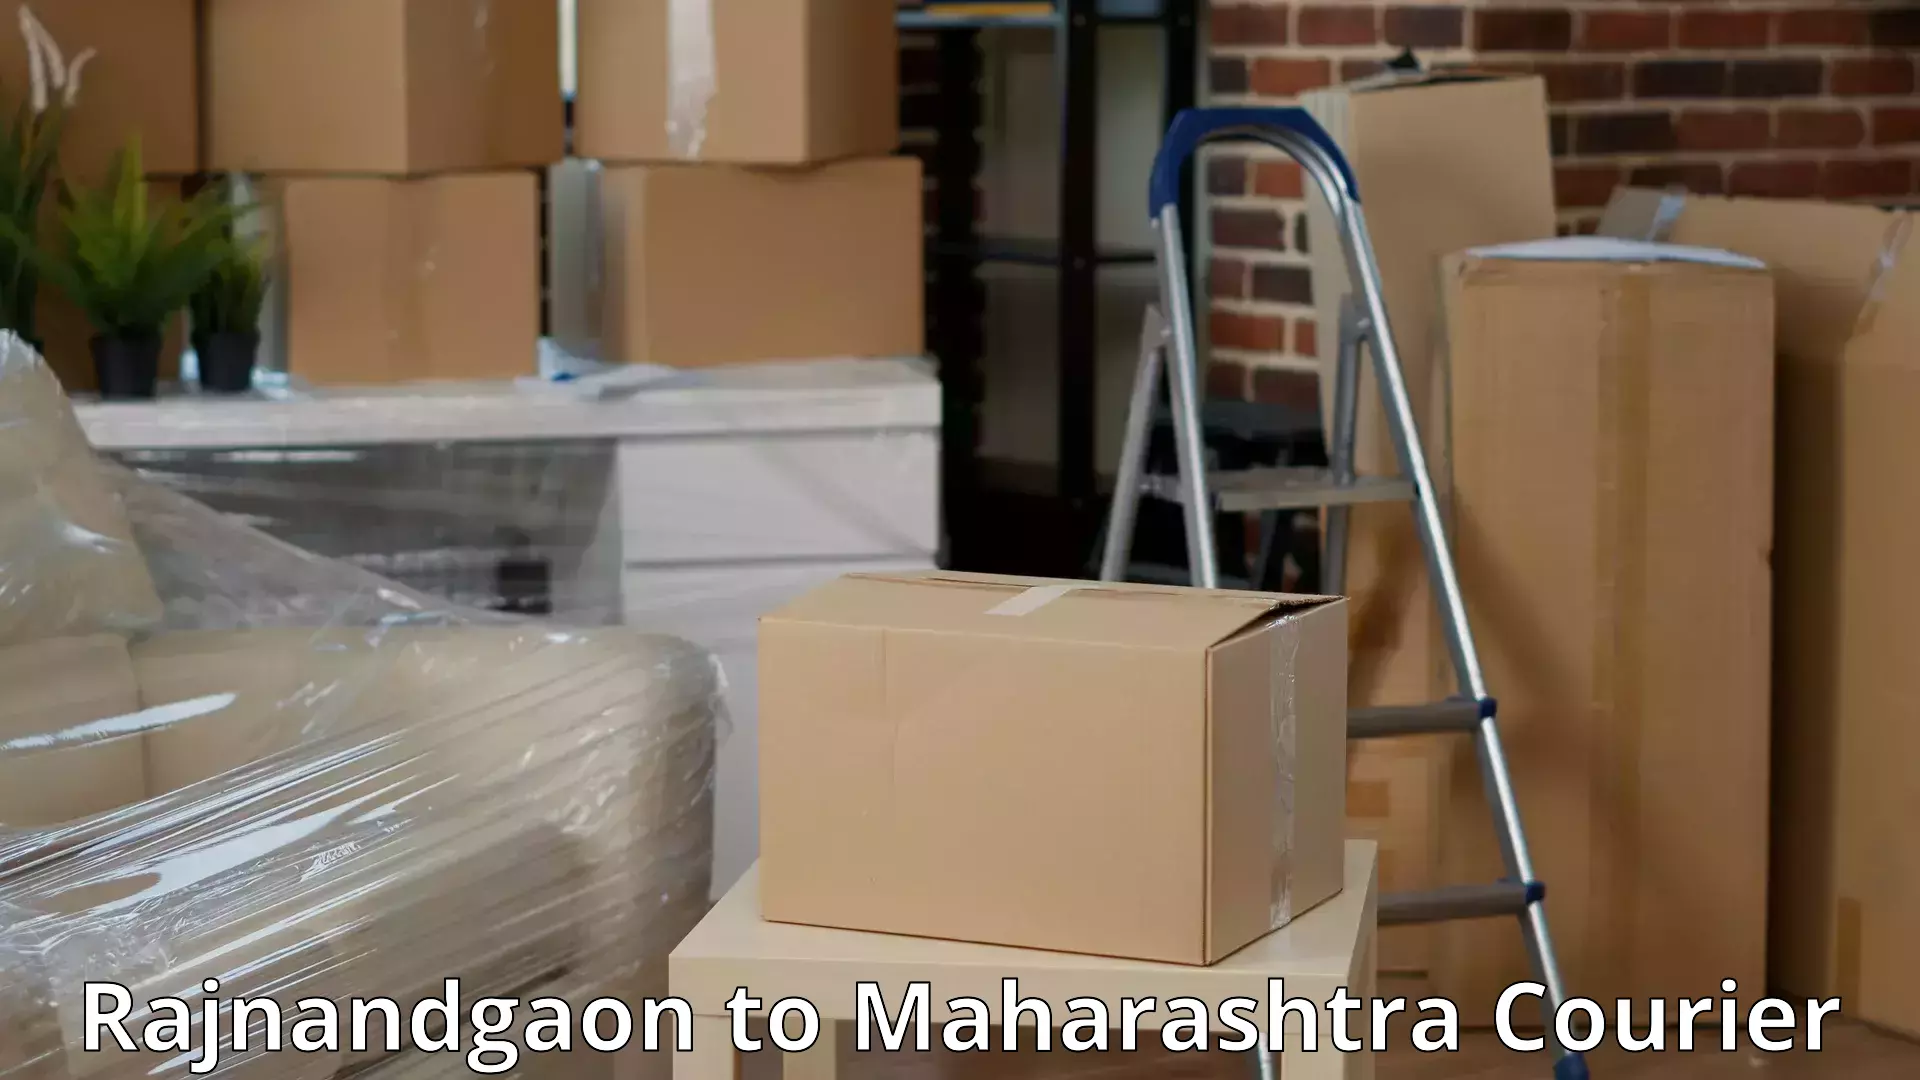 Professional relocation services Rajnandgaon to Chinchbunder